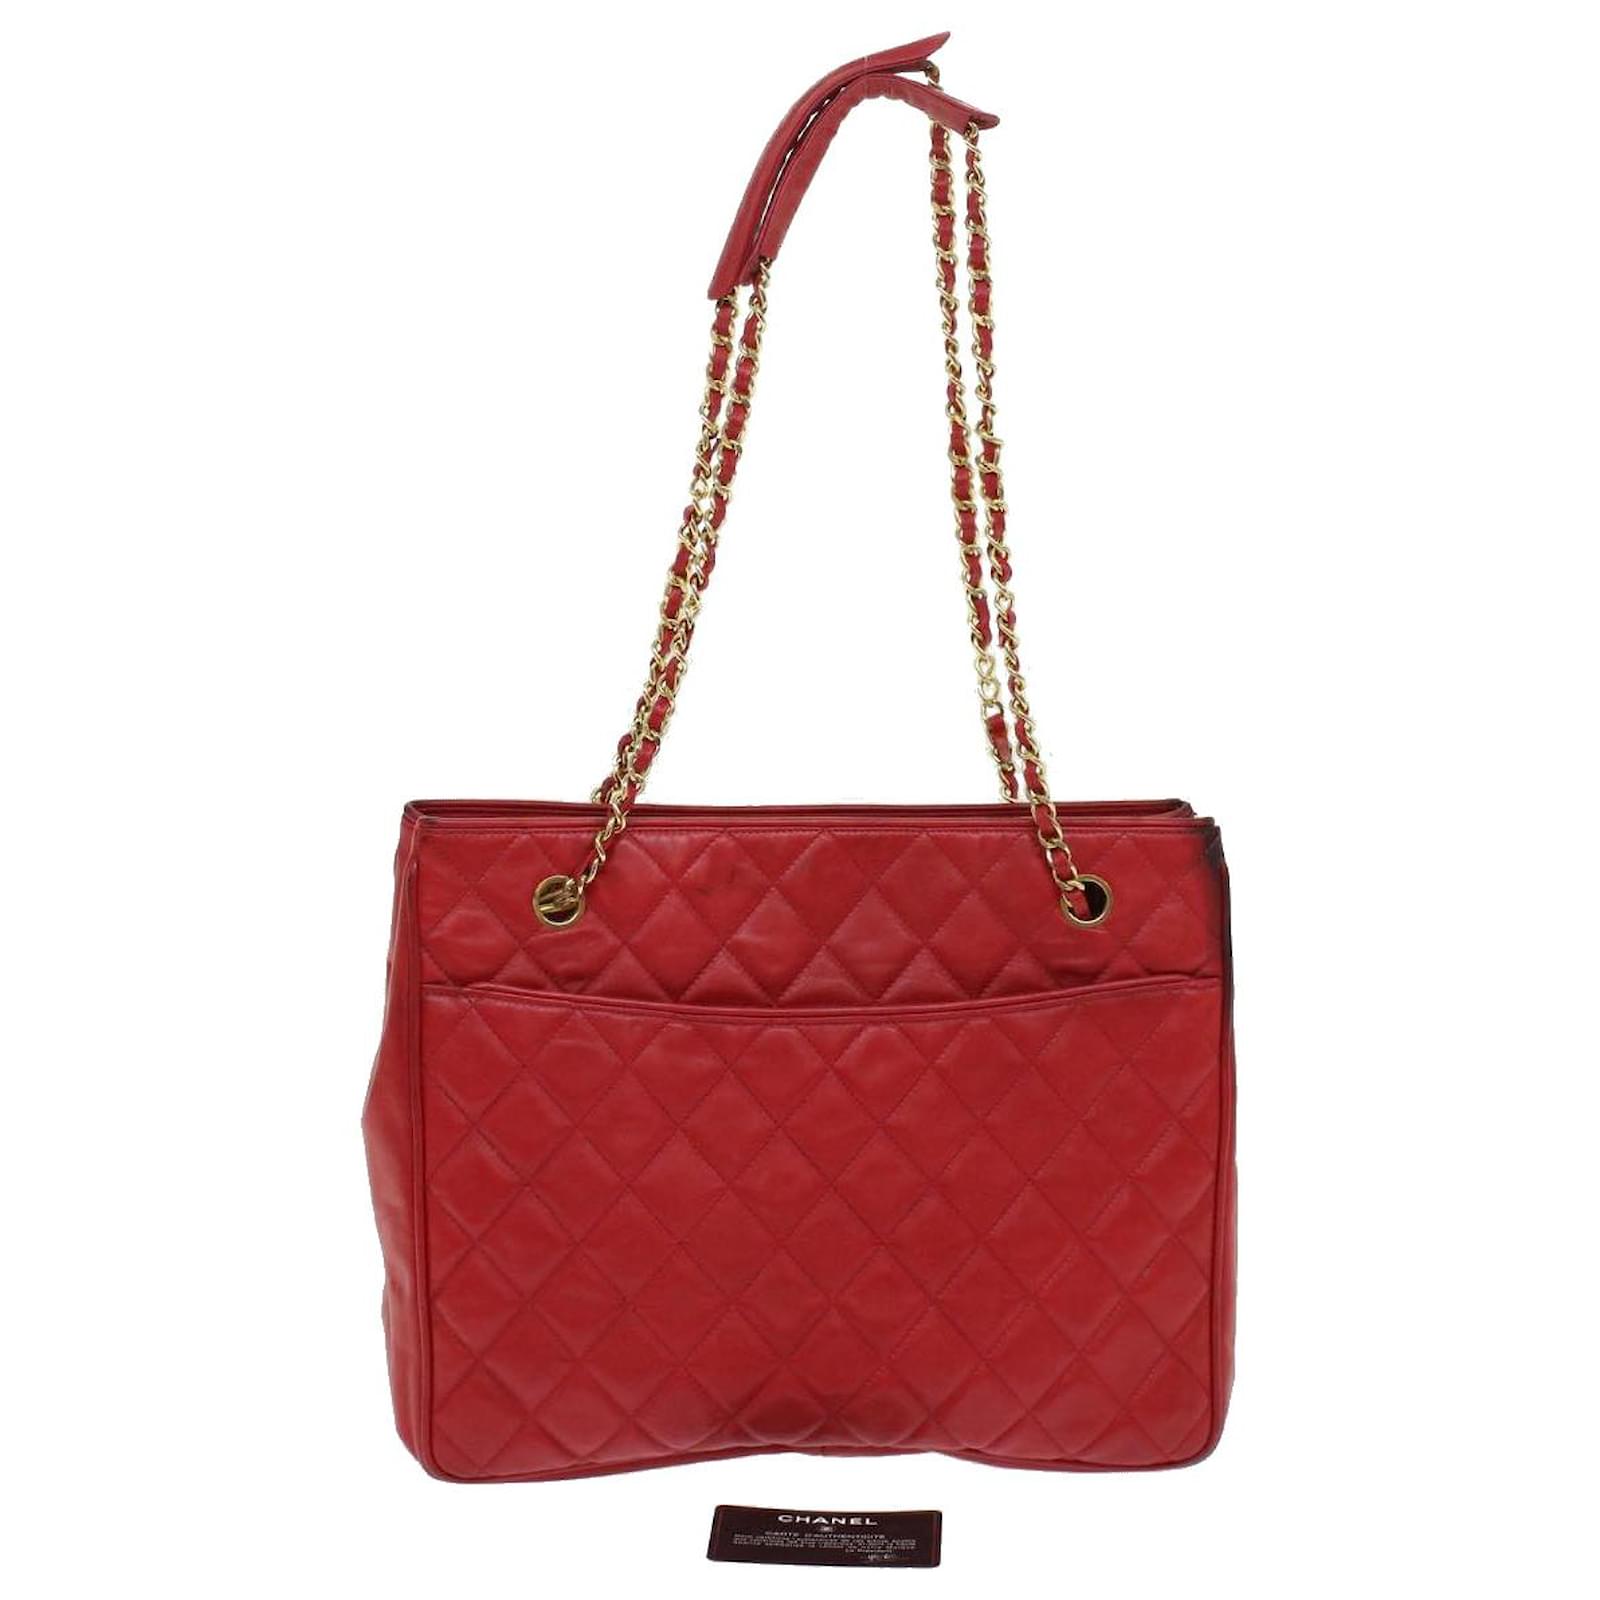 CHANEL Matelasse Chain Shoulder Bag Leather Red CC Auth 45966 ref